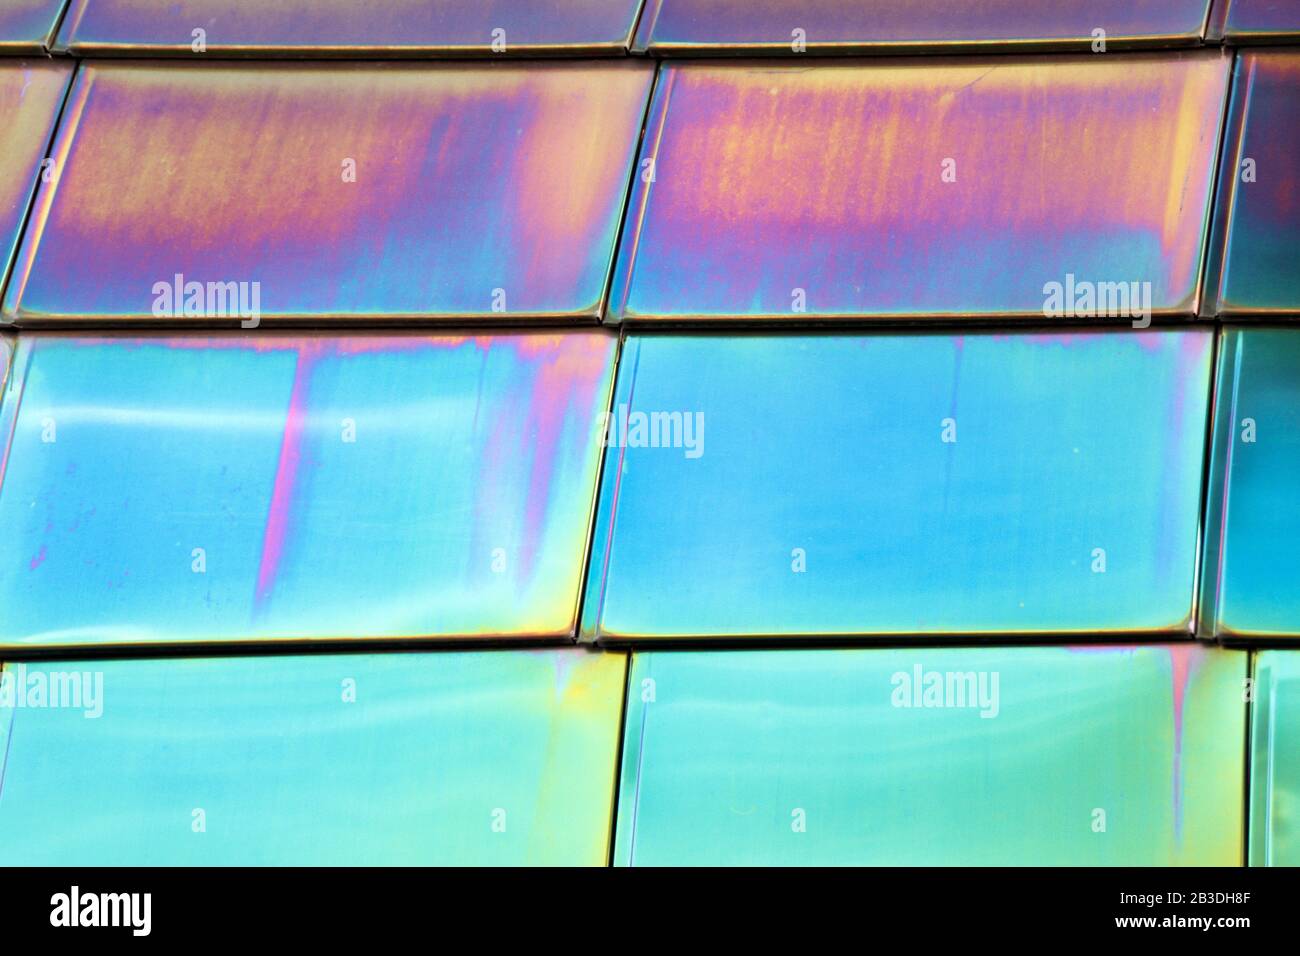 Reflective mirrored metal tiles show neon blue and pink. Stock Photo